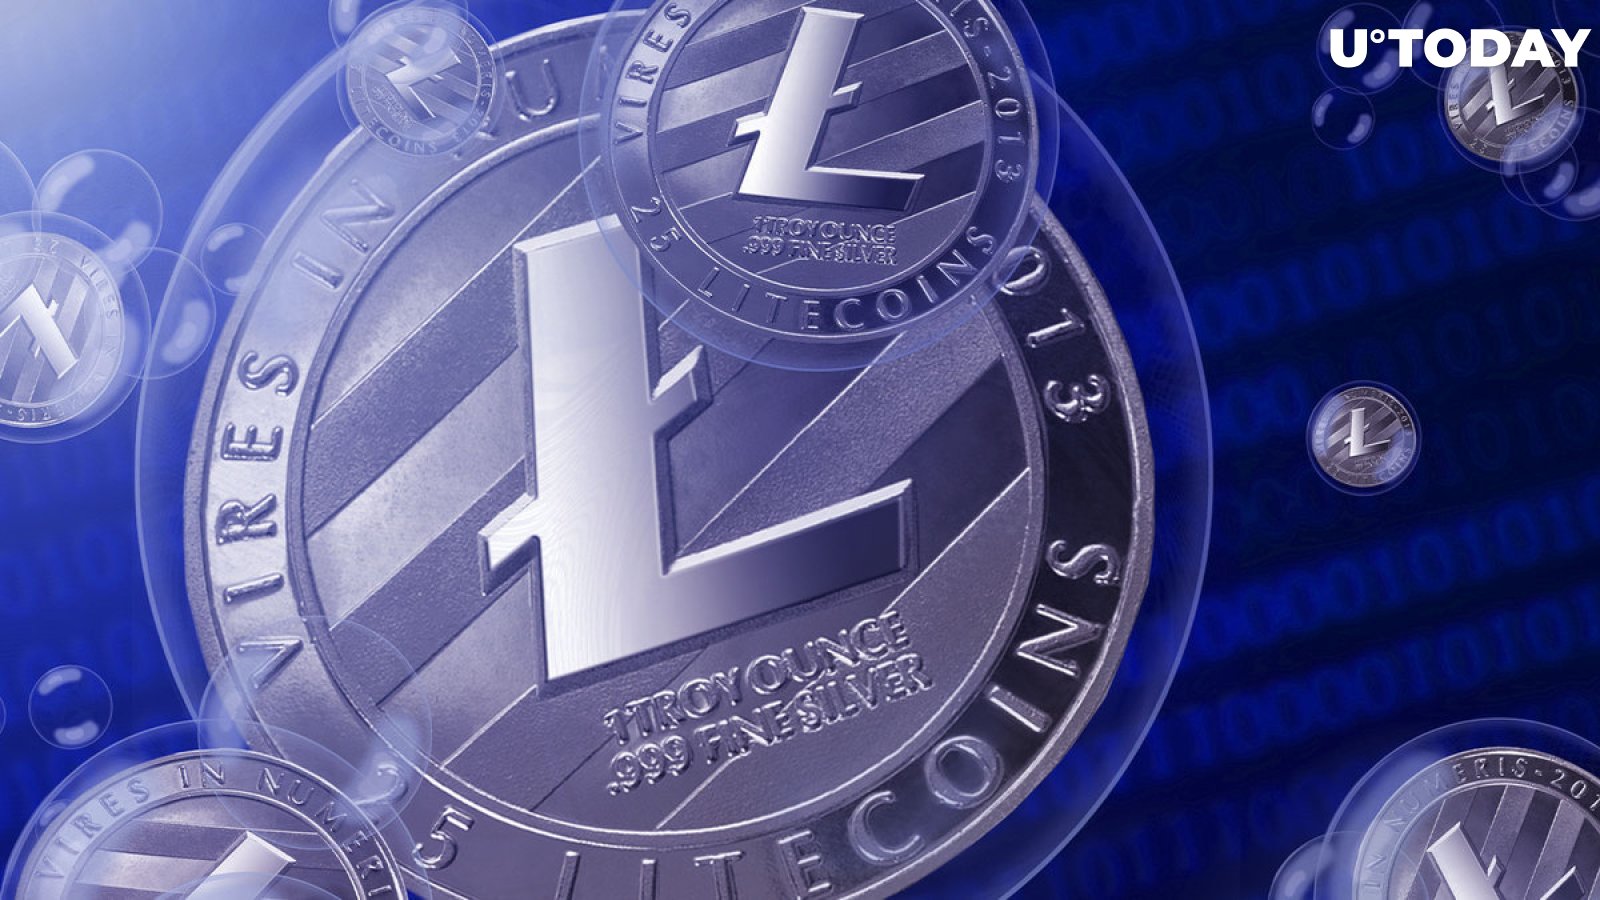 Litecoin (LTC) Halving to Go Live in 150, Here Are Key Trends to Watch